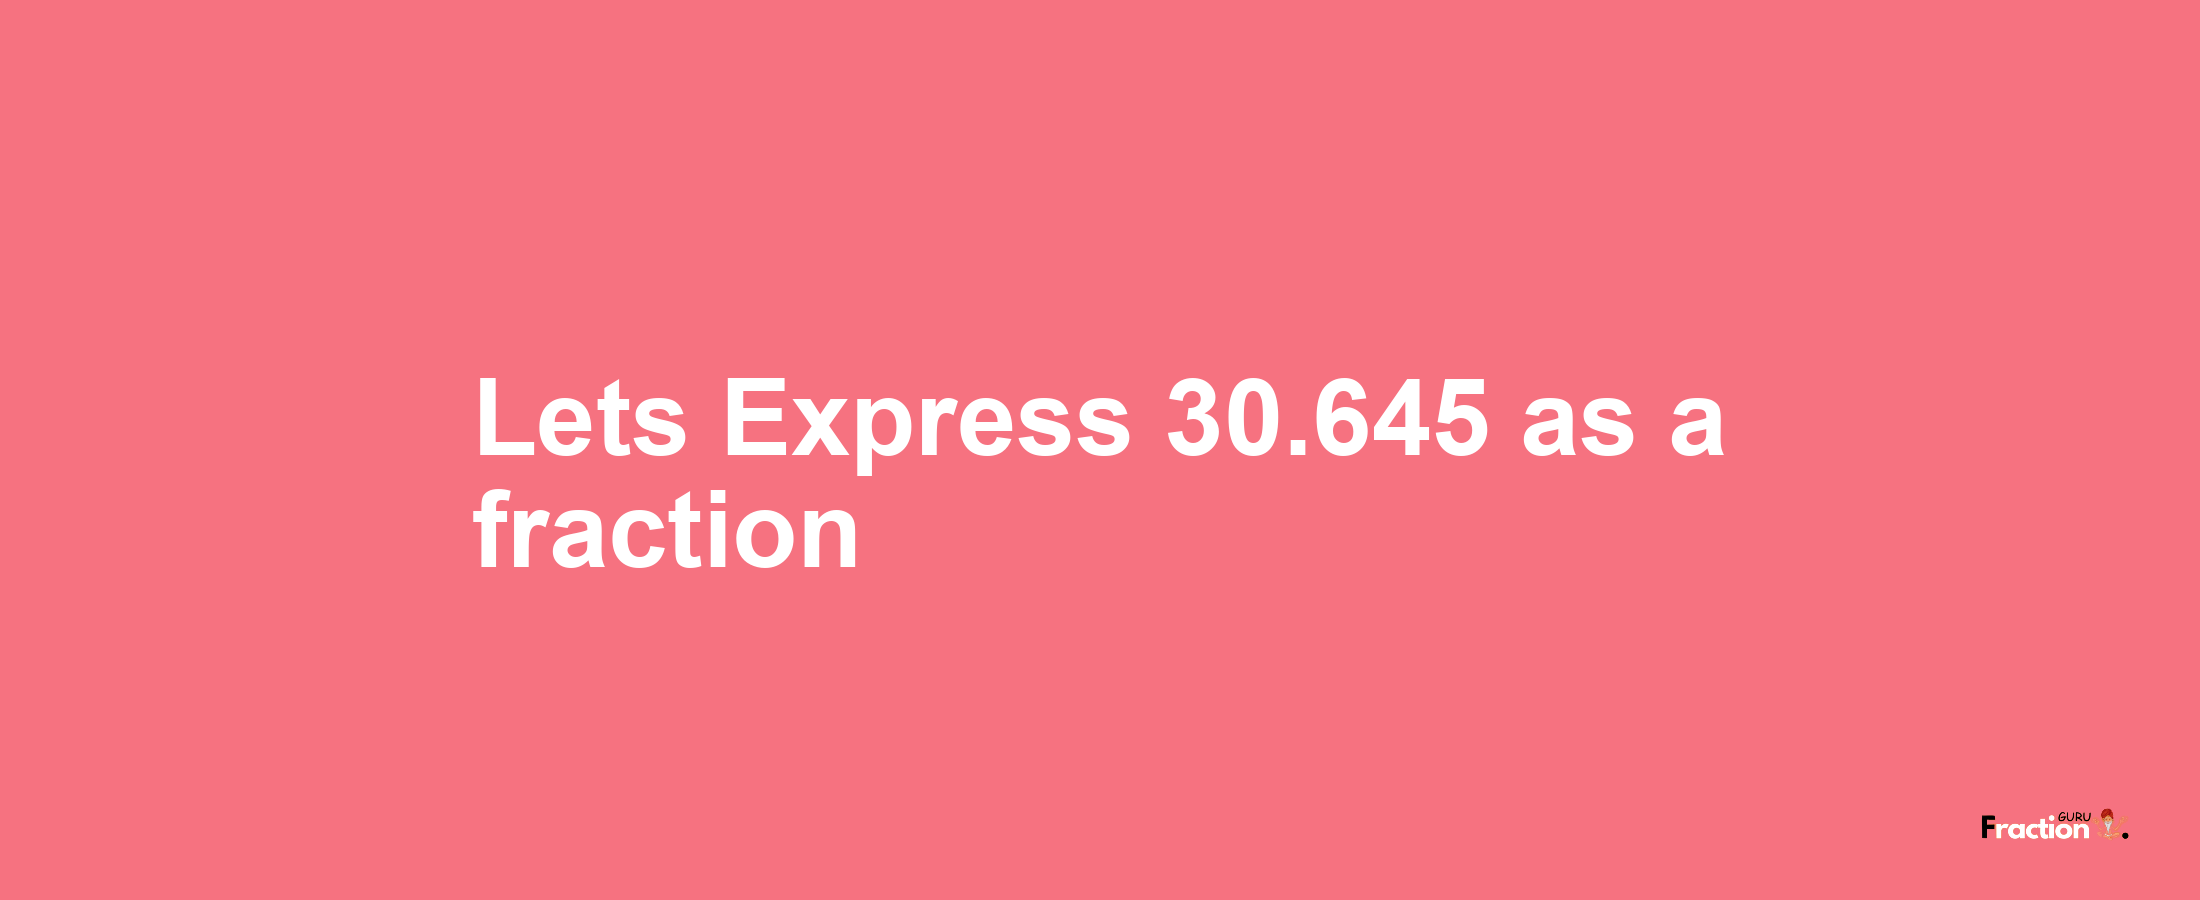 Lets Express 30.645 as afraction